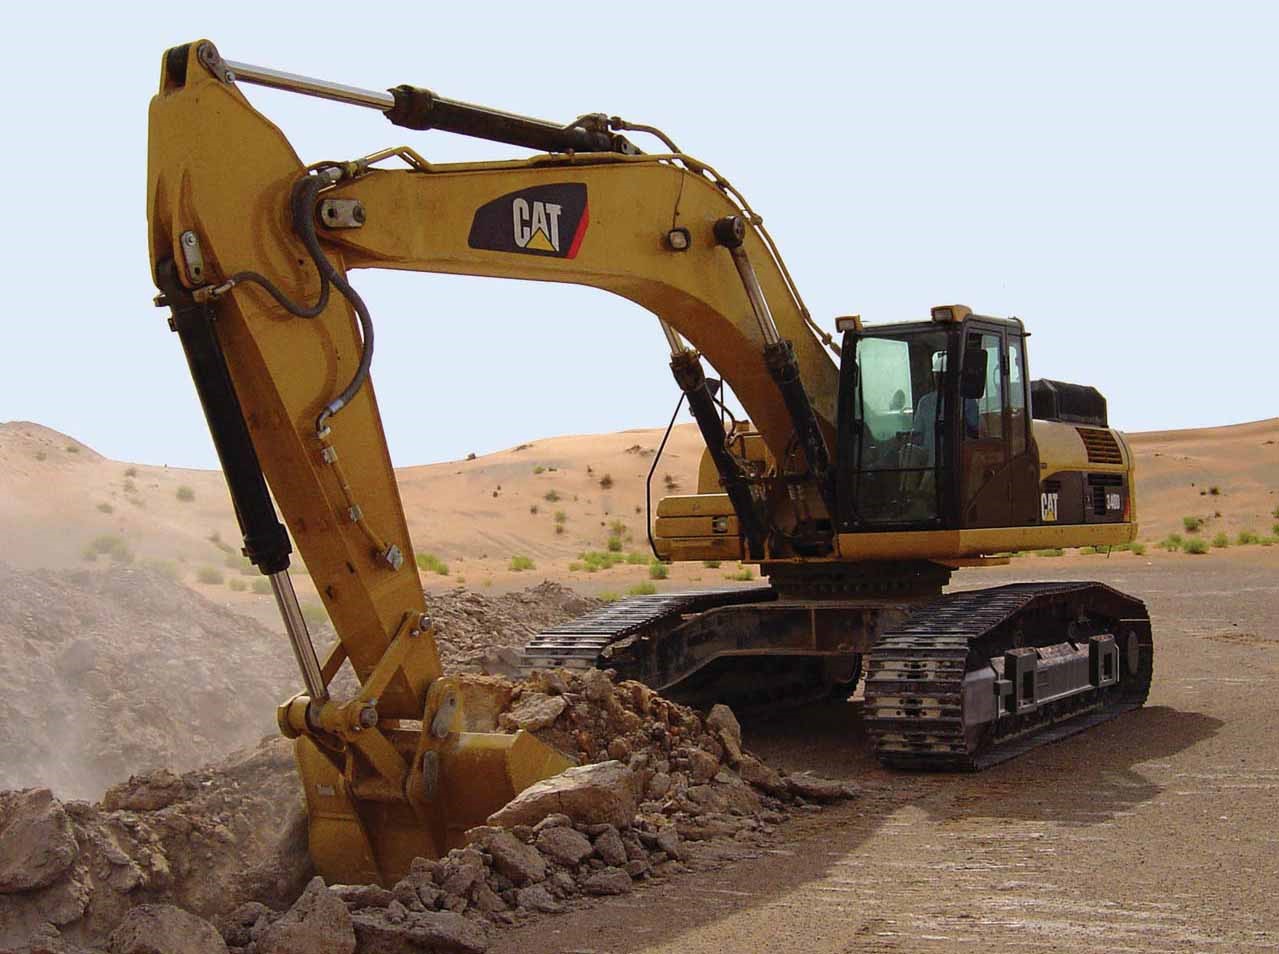 Construction Equipment For Sale,